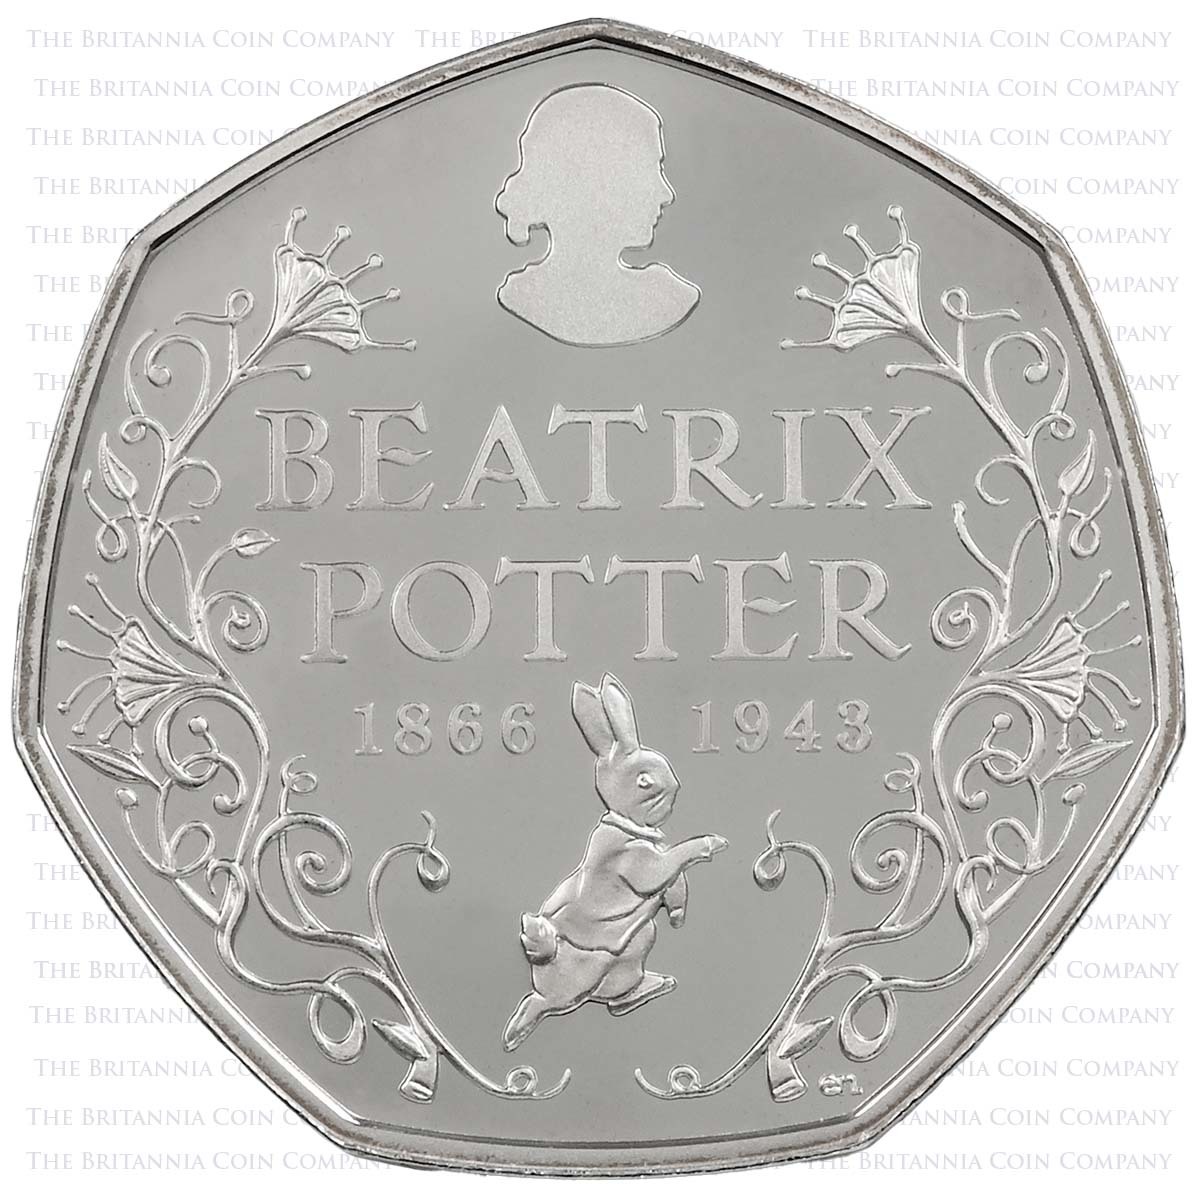 UK16BPSP 2016 Beatrix Potter 150th Anniversary Fifty Pence Silver Proof Coin Reverse